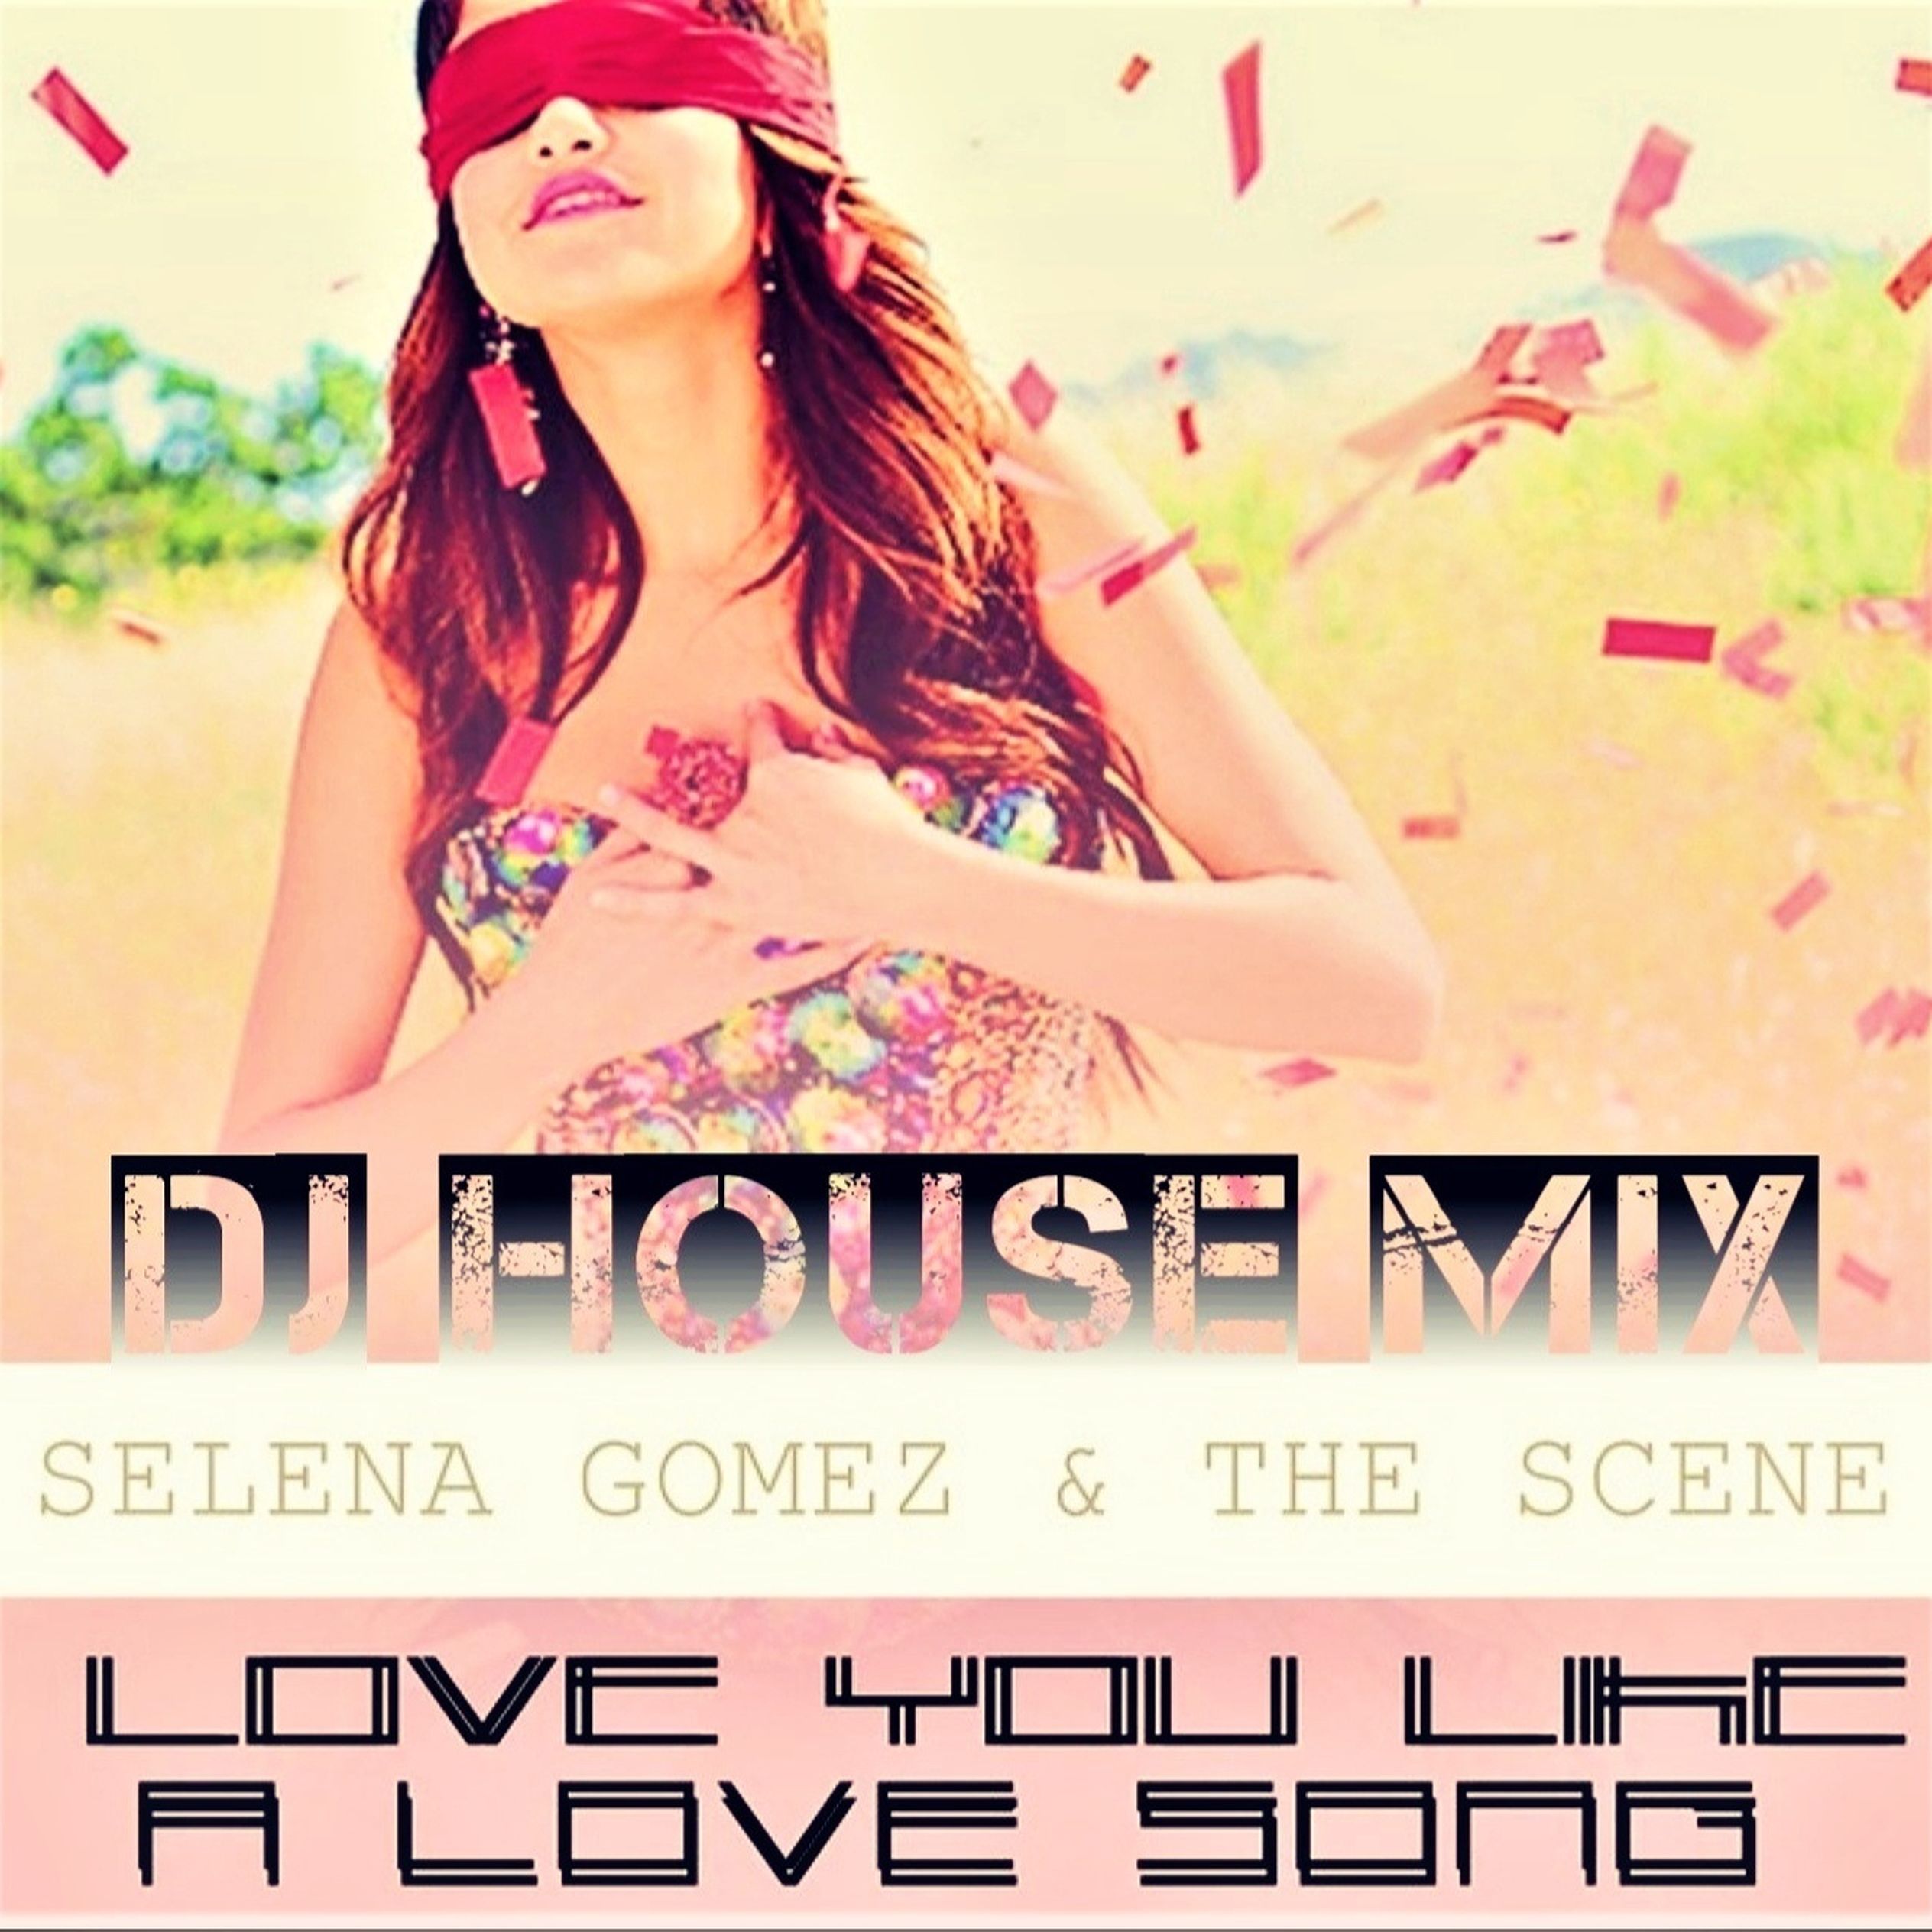 Love song mix. DJ House Music. Love you like a Love Song. Selena Gomez Calm Love is like you. Что такое релиз в Музыке.